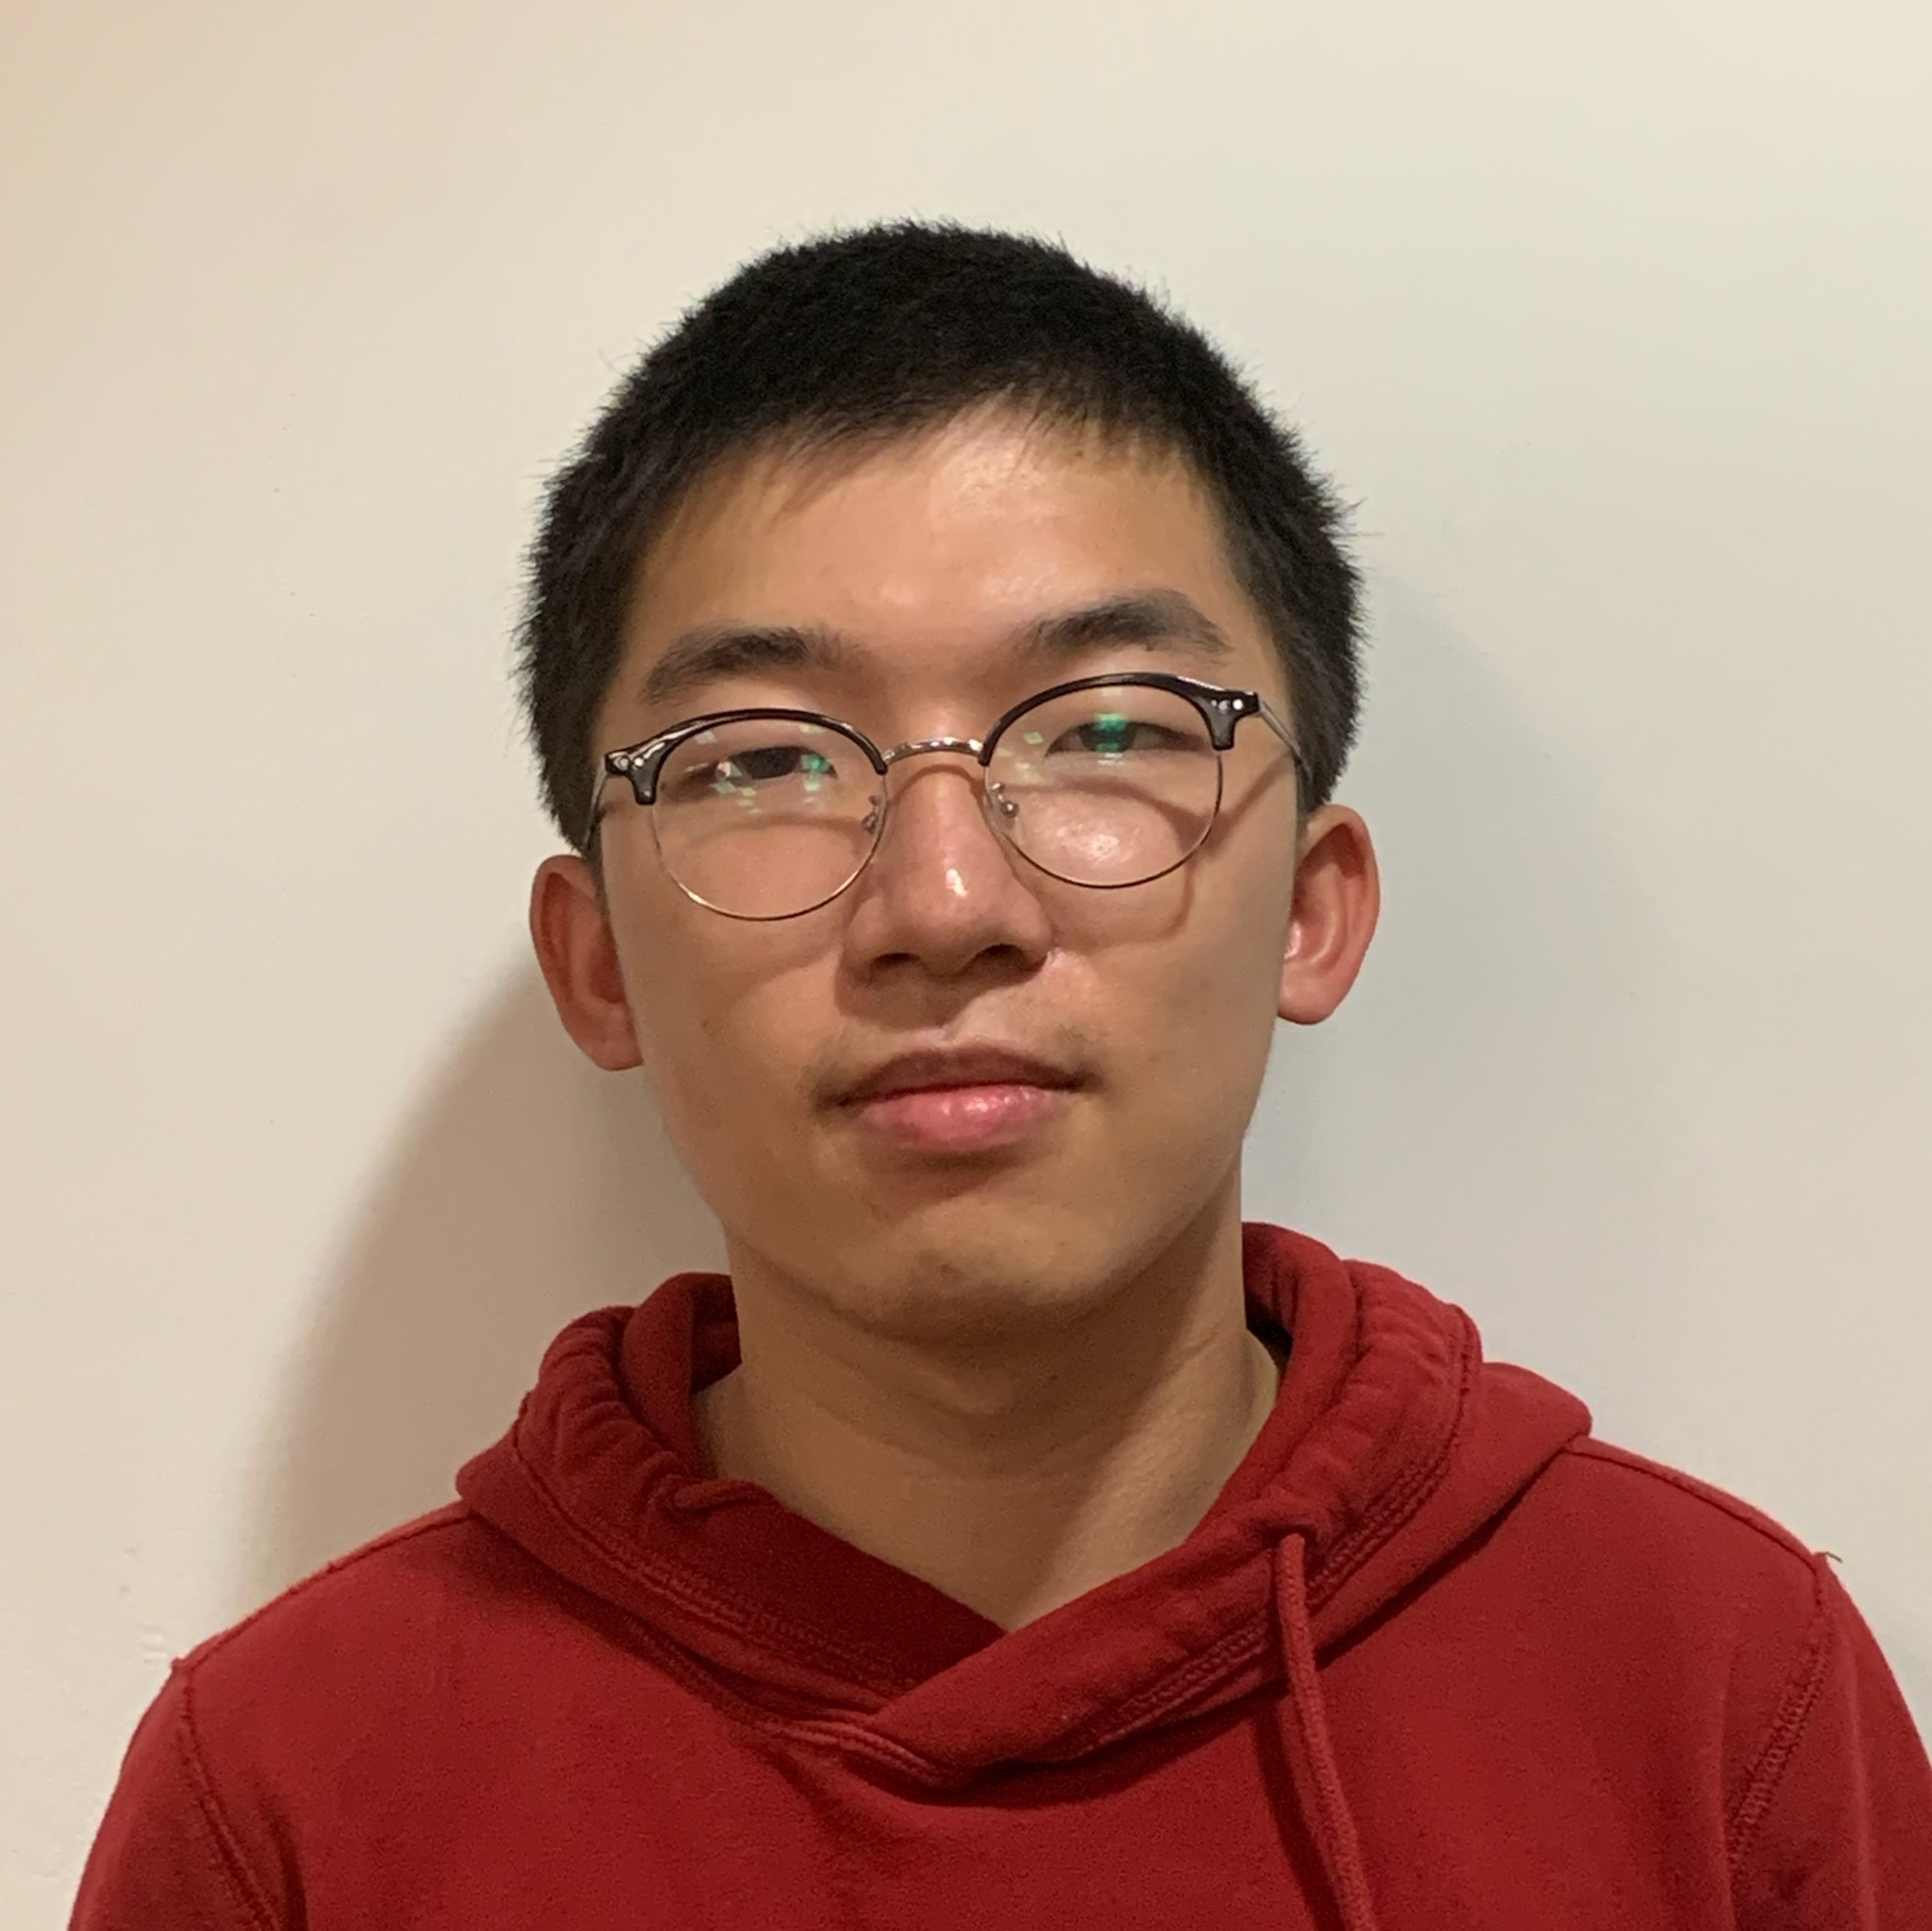 Johnny Chen is an Electrical Engineering major planning to get a masters in Computer Engineering. He is interested in the applications of low power electronics for sustainability projects. He helps create the system which schedules the electronics in the AutoAquaponics systems, and keeps it self sufficient.